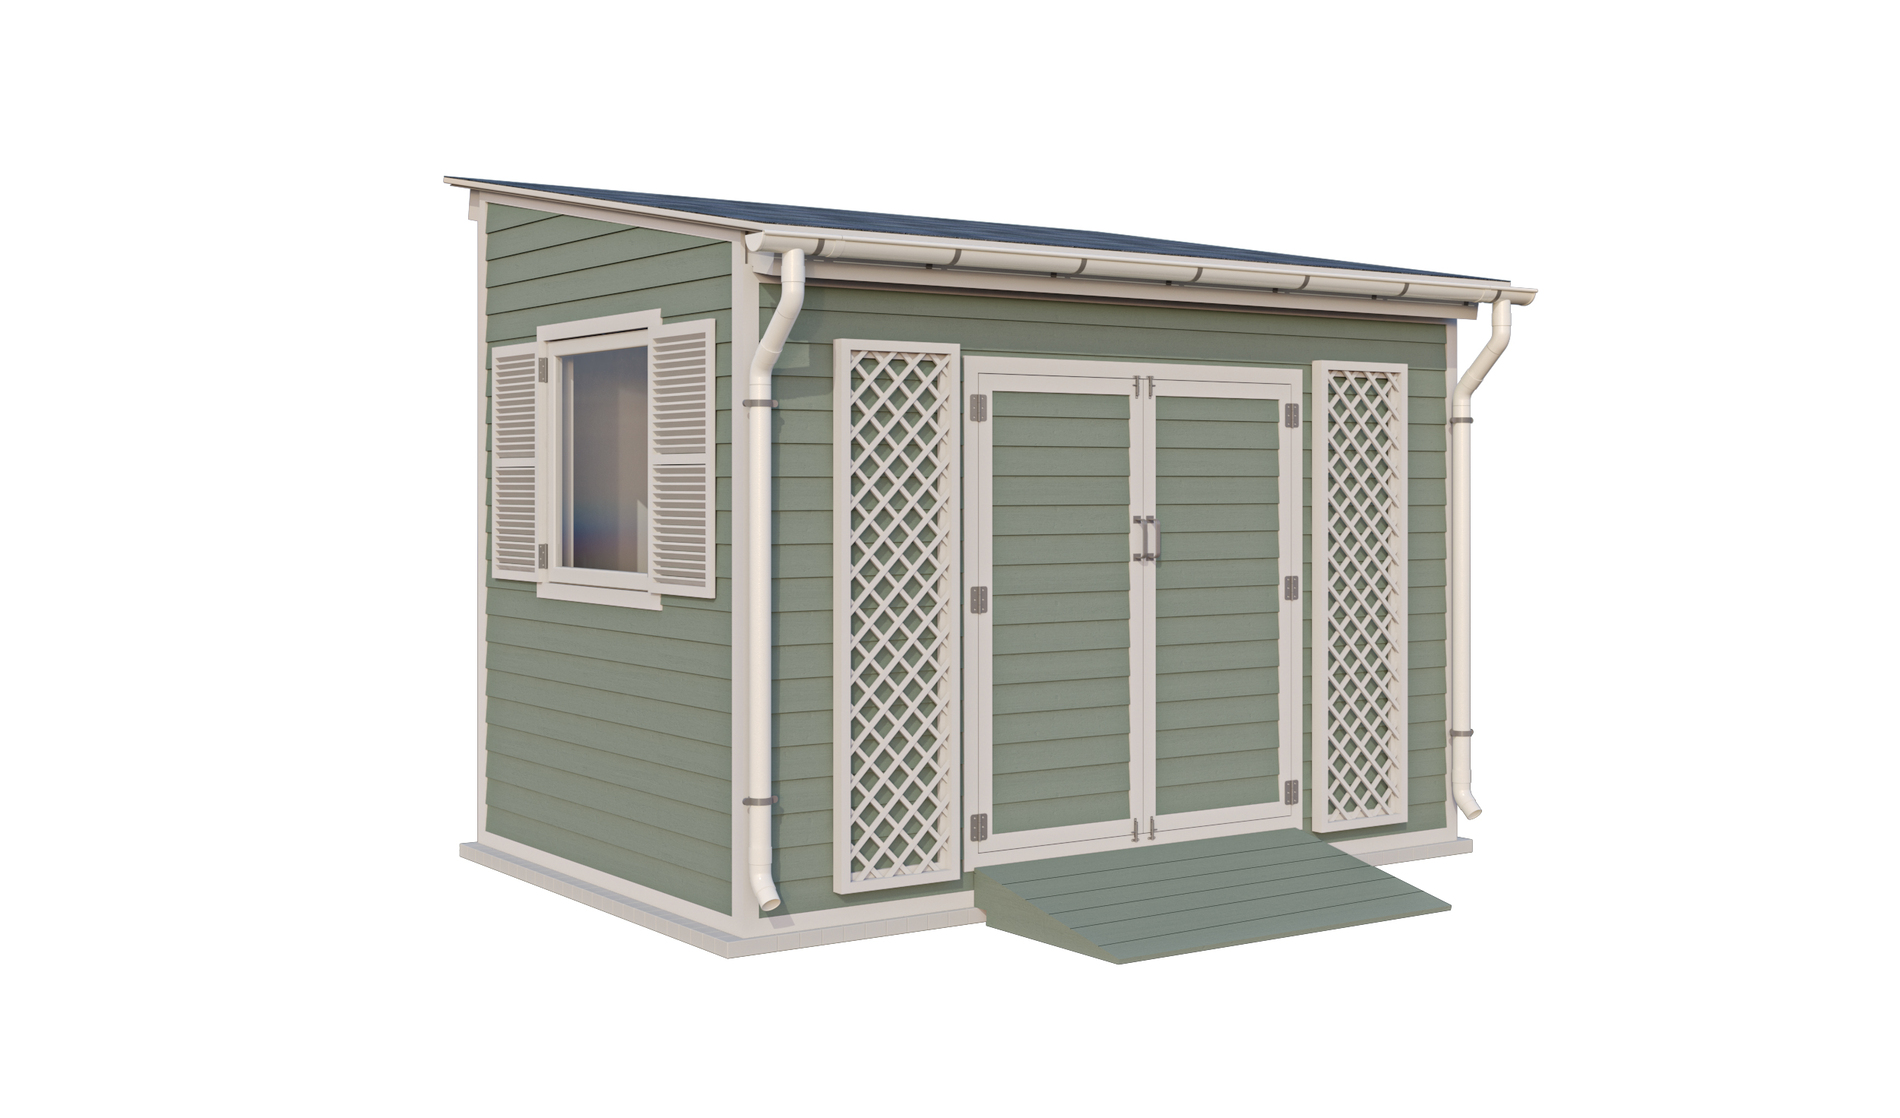 8x12 lean to garden shed